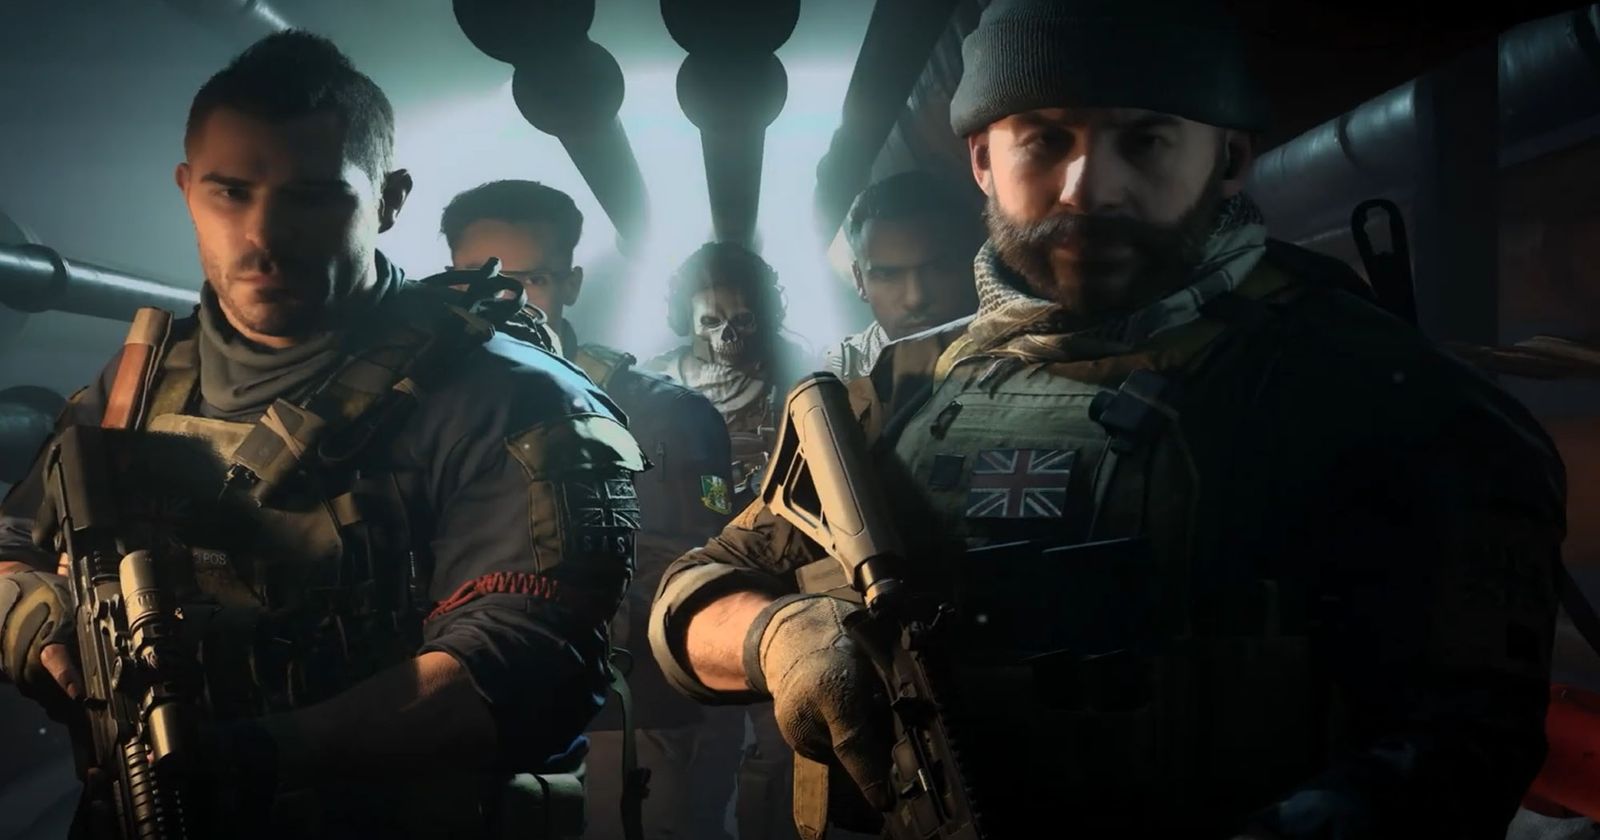 How Call of Duty: Vanguard Connects to Black Ops and Modern Warfare